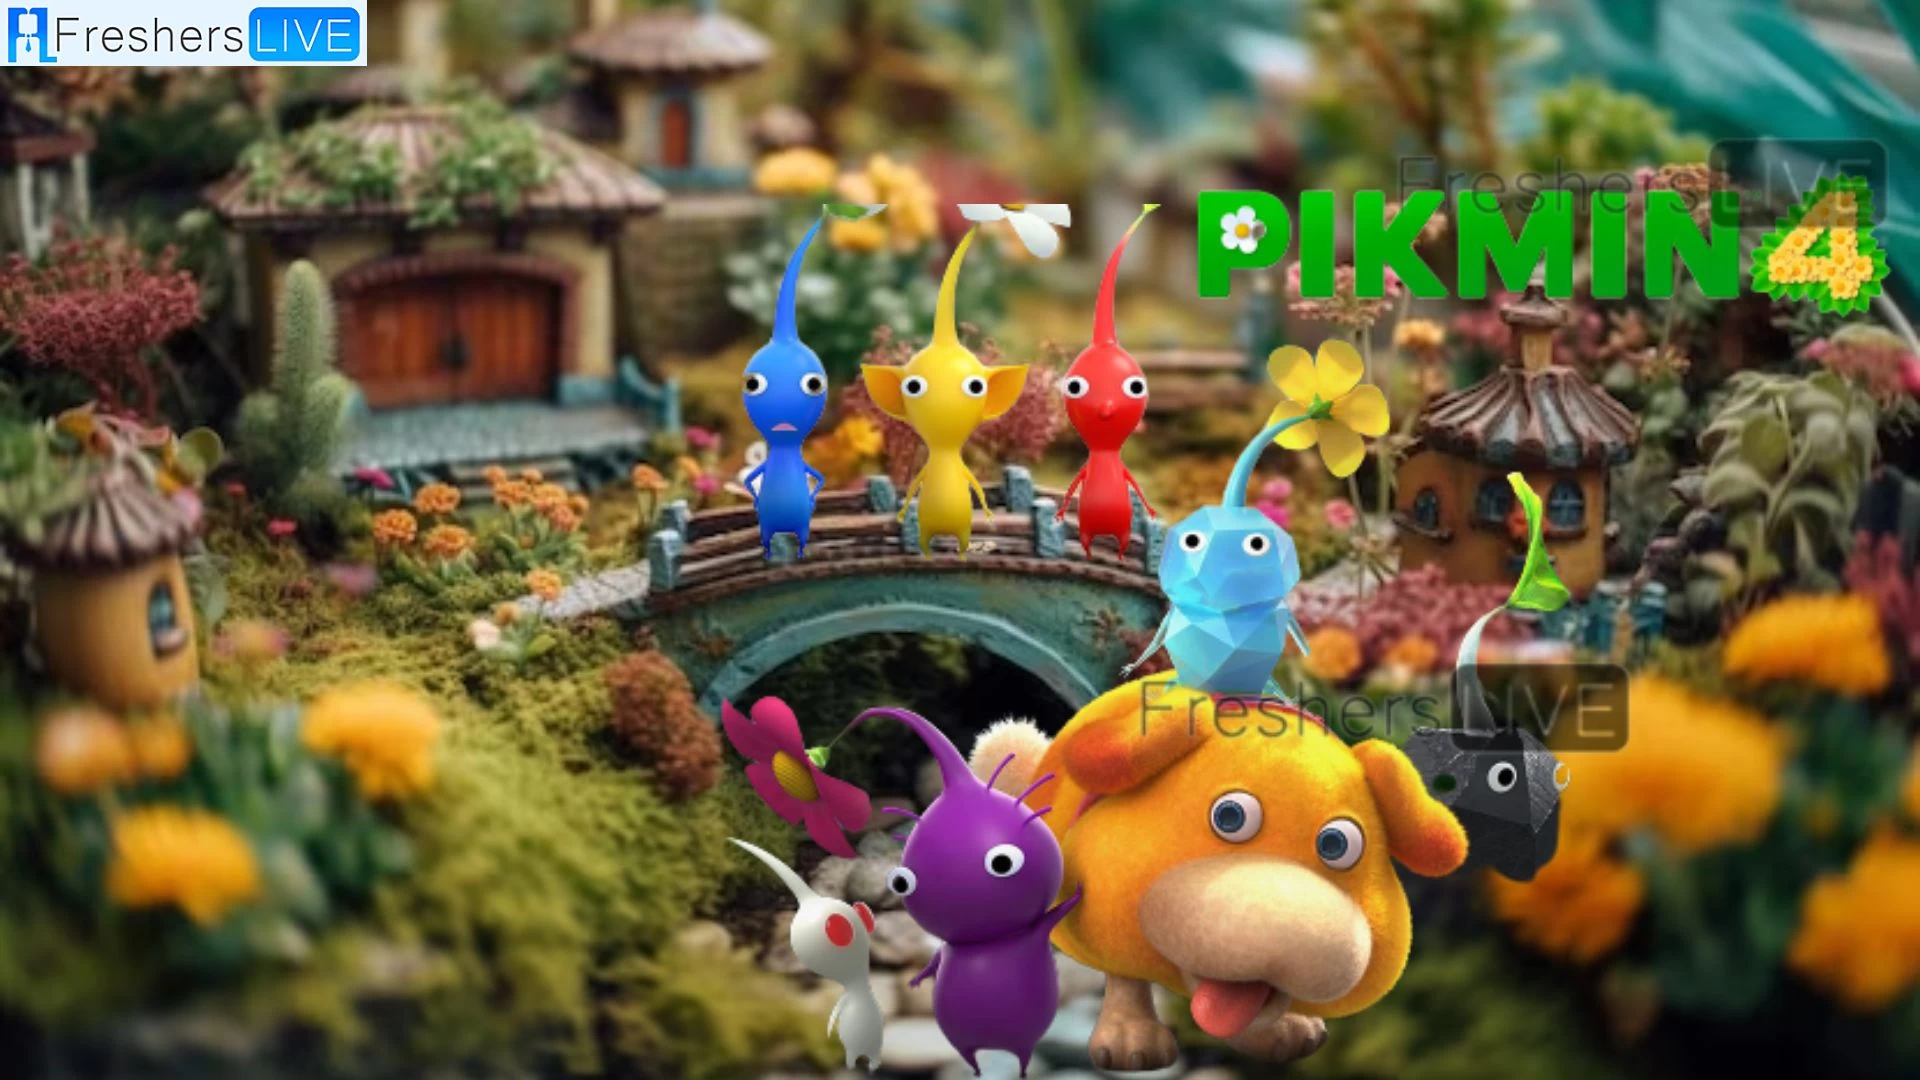 Pikmin 4 Update Out Now Version 1.0.2 Patch Notes, Find Here What Has Been Included!